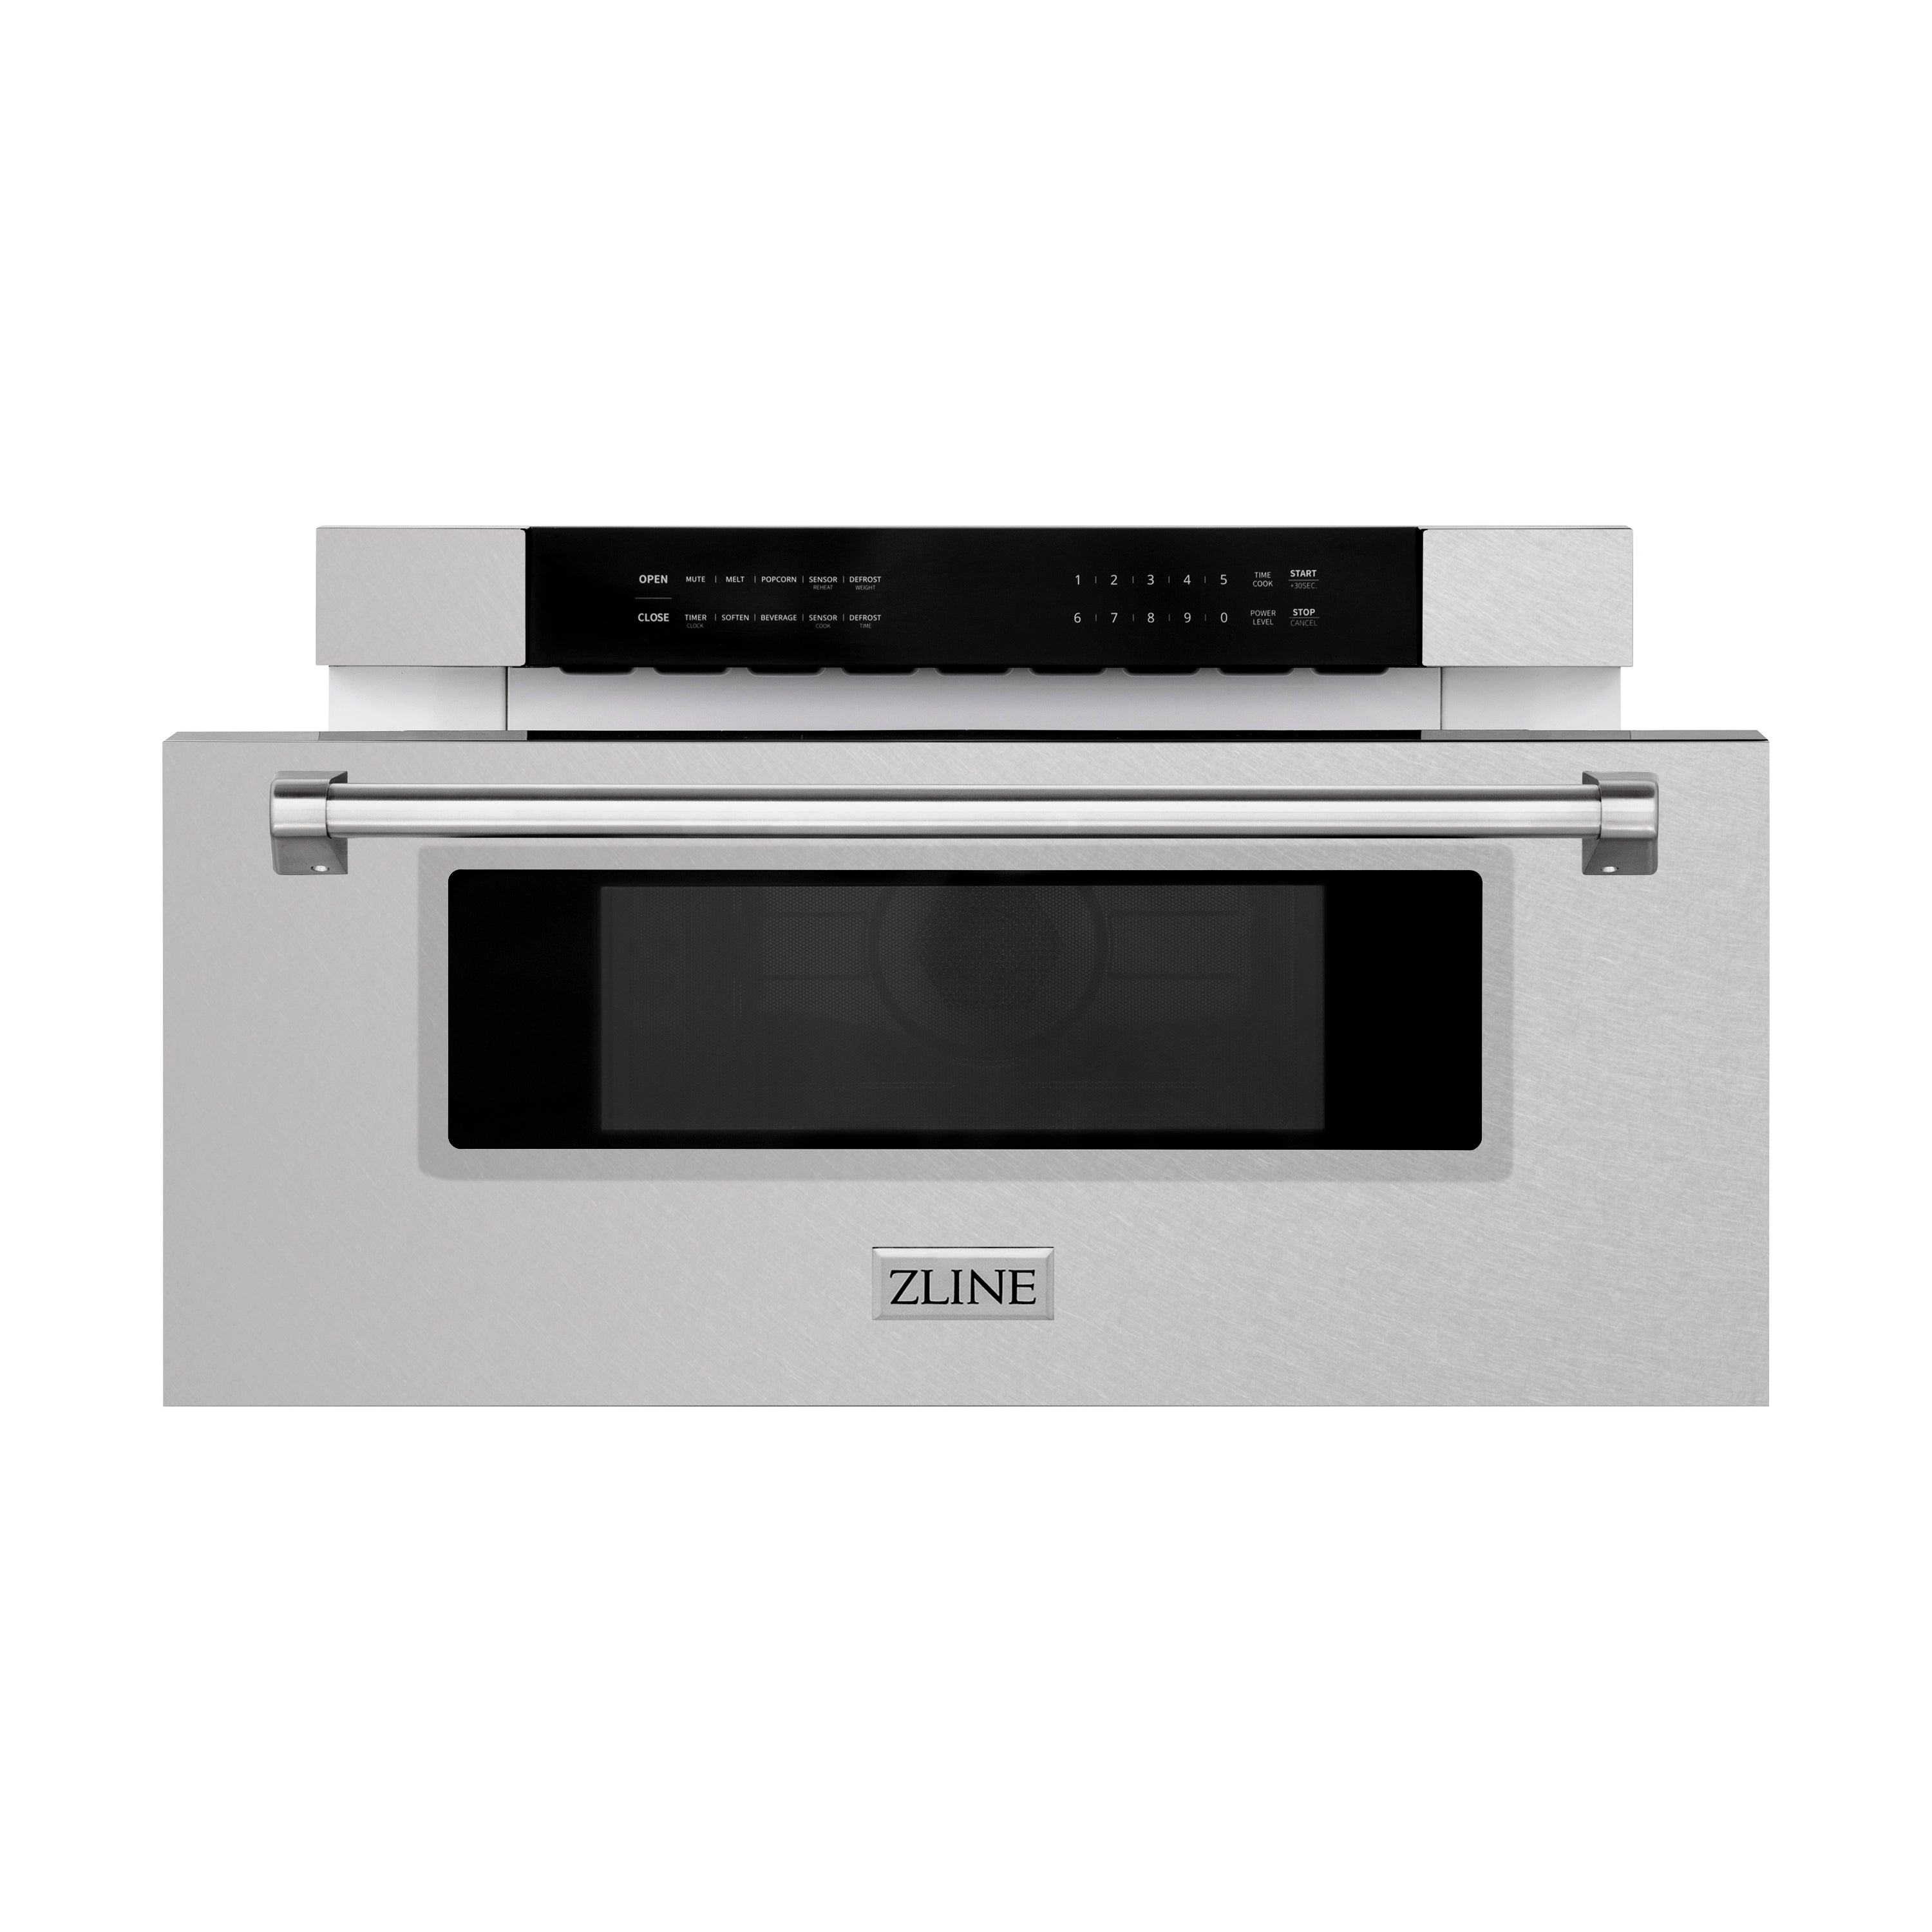 ZLINE 30 in. 1.2 cu. ft. Built-In Microwave Drawer in DuraSnow Stainless Steel (MWD-30-SS) Front View Drawer Open